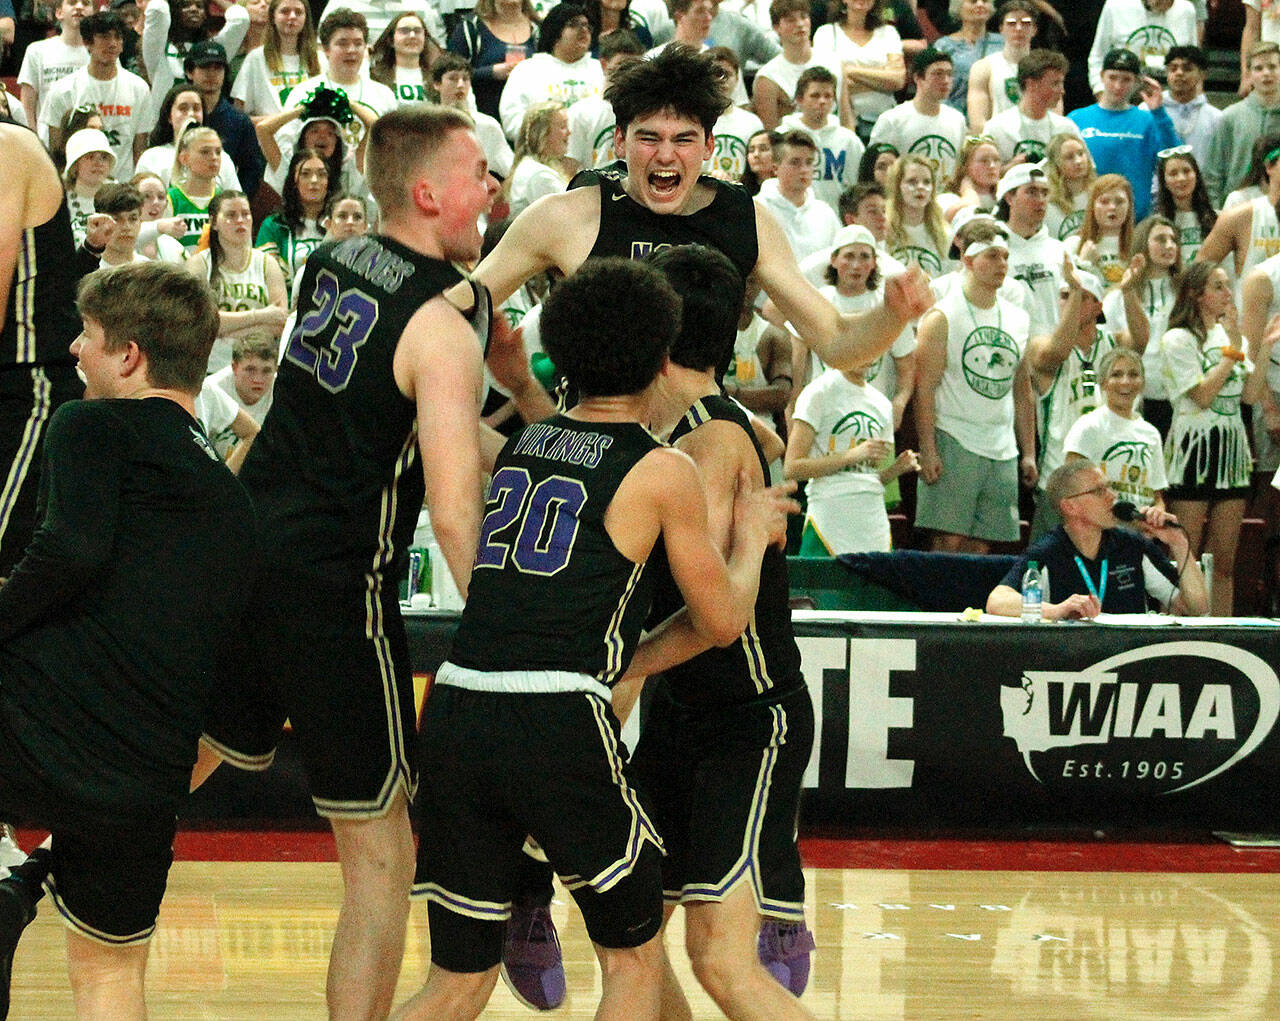 The North Kitsap boys basketball team celebrates after pulling off an improbable comeback in the semifinals in the 2A state tournament against Lynden. (File photo)